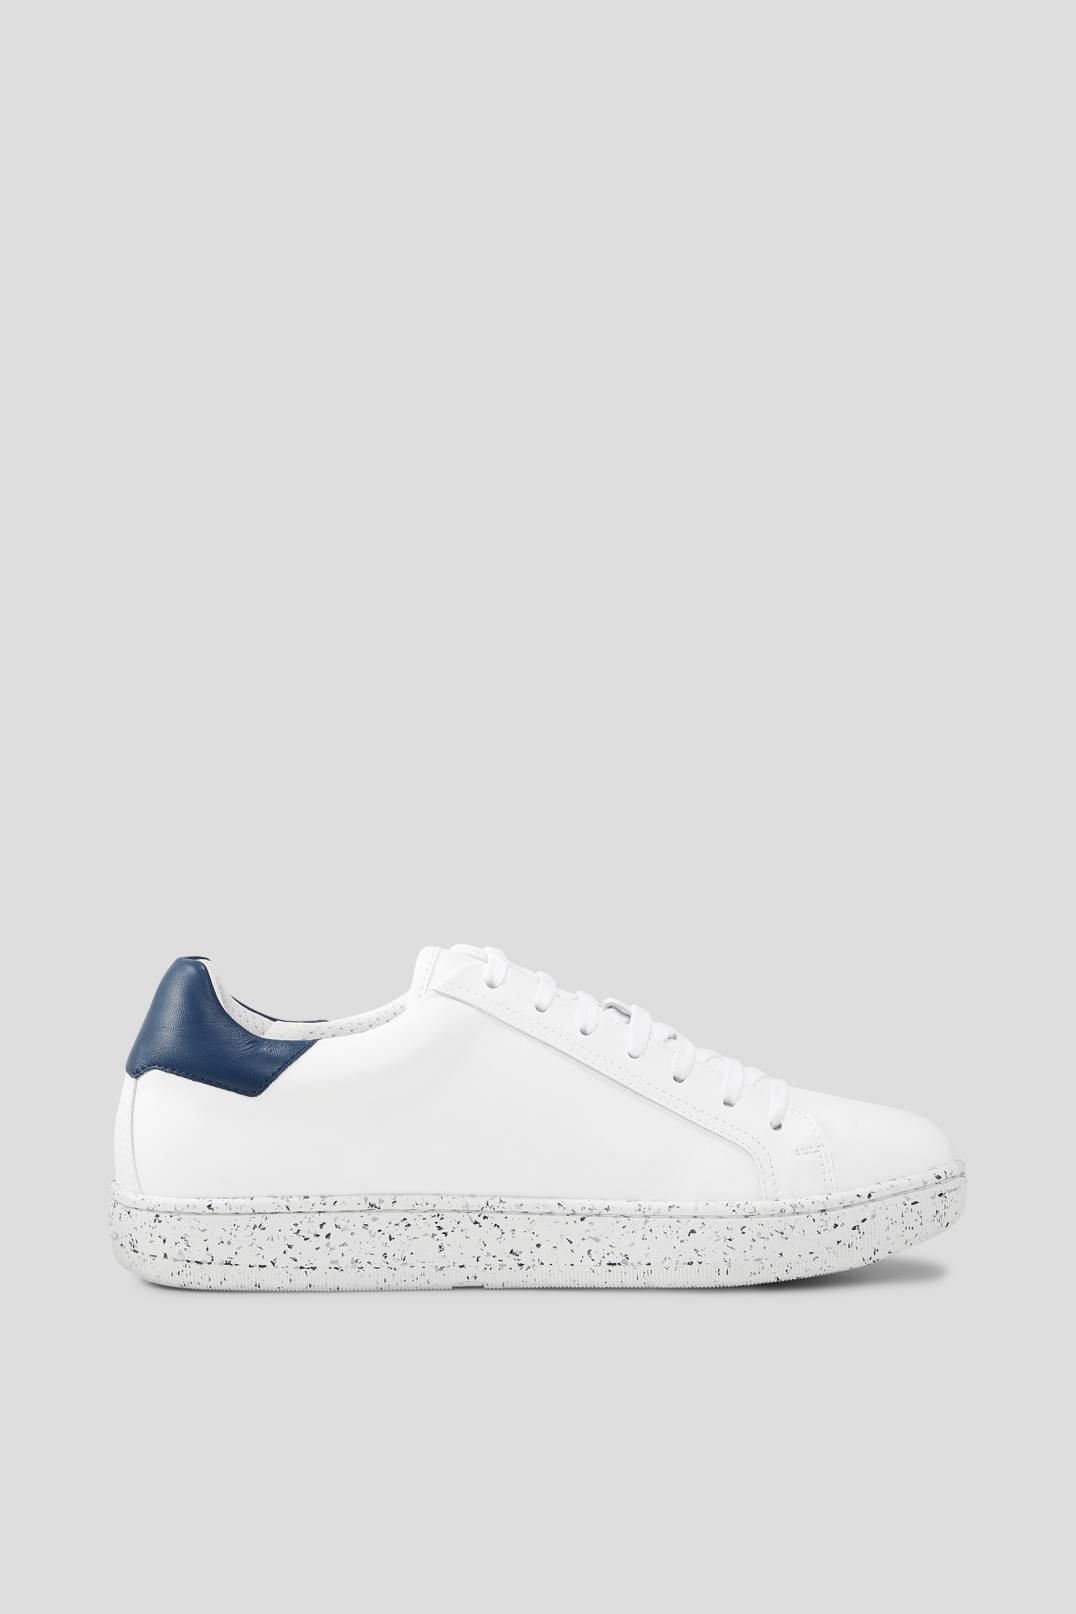 MALMÖ SUSTAINABLE SNEAKERS IN WHITE/NAVY BLUE - 2